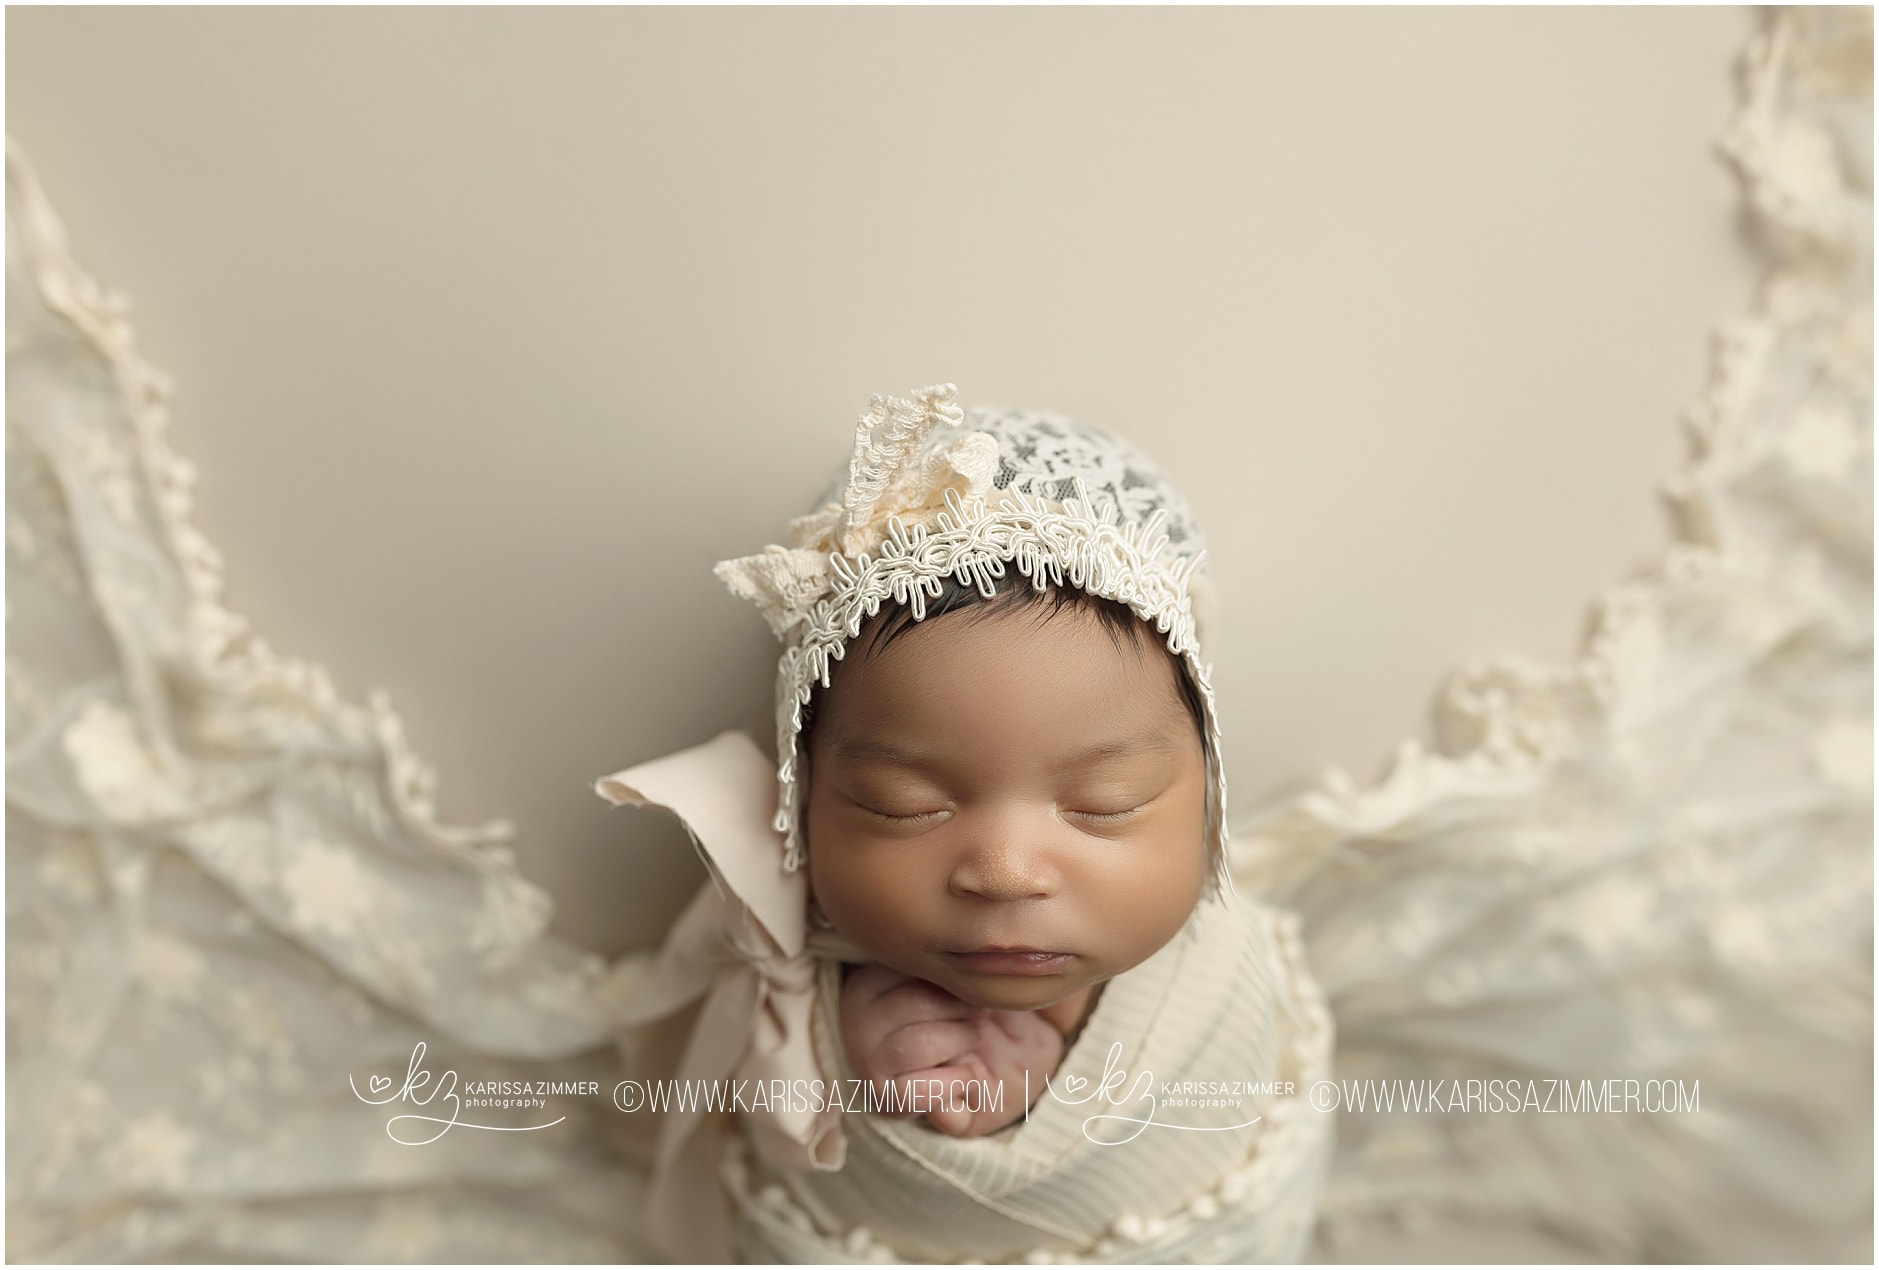 Newborn baby girl studio photo on cream backdrop with lace hat